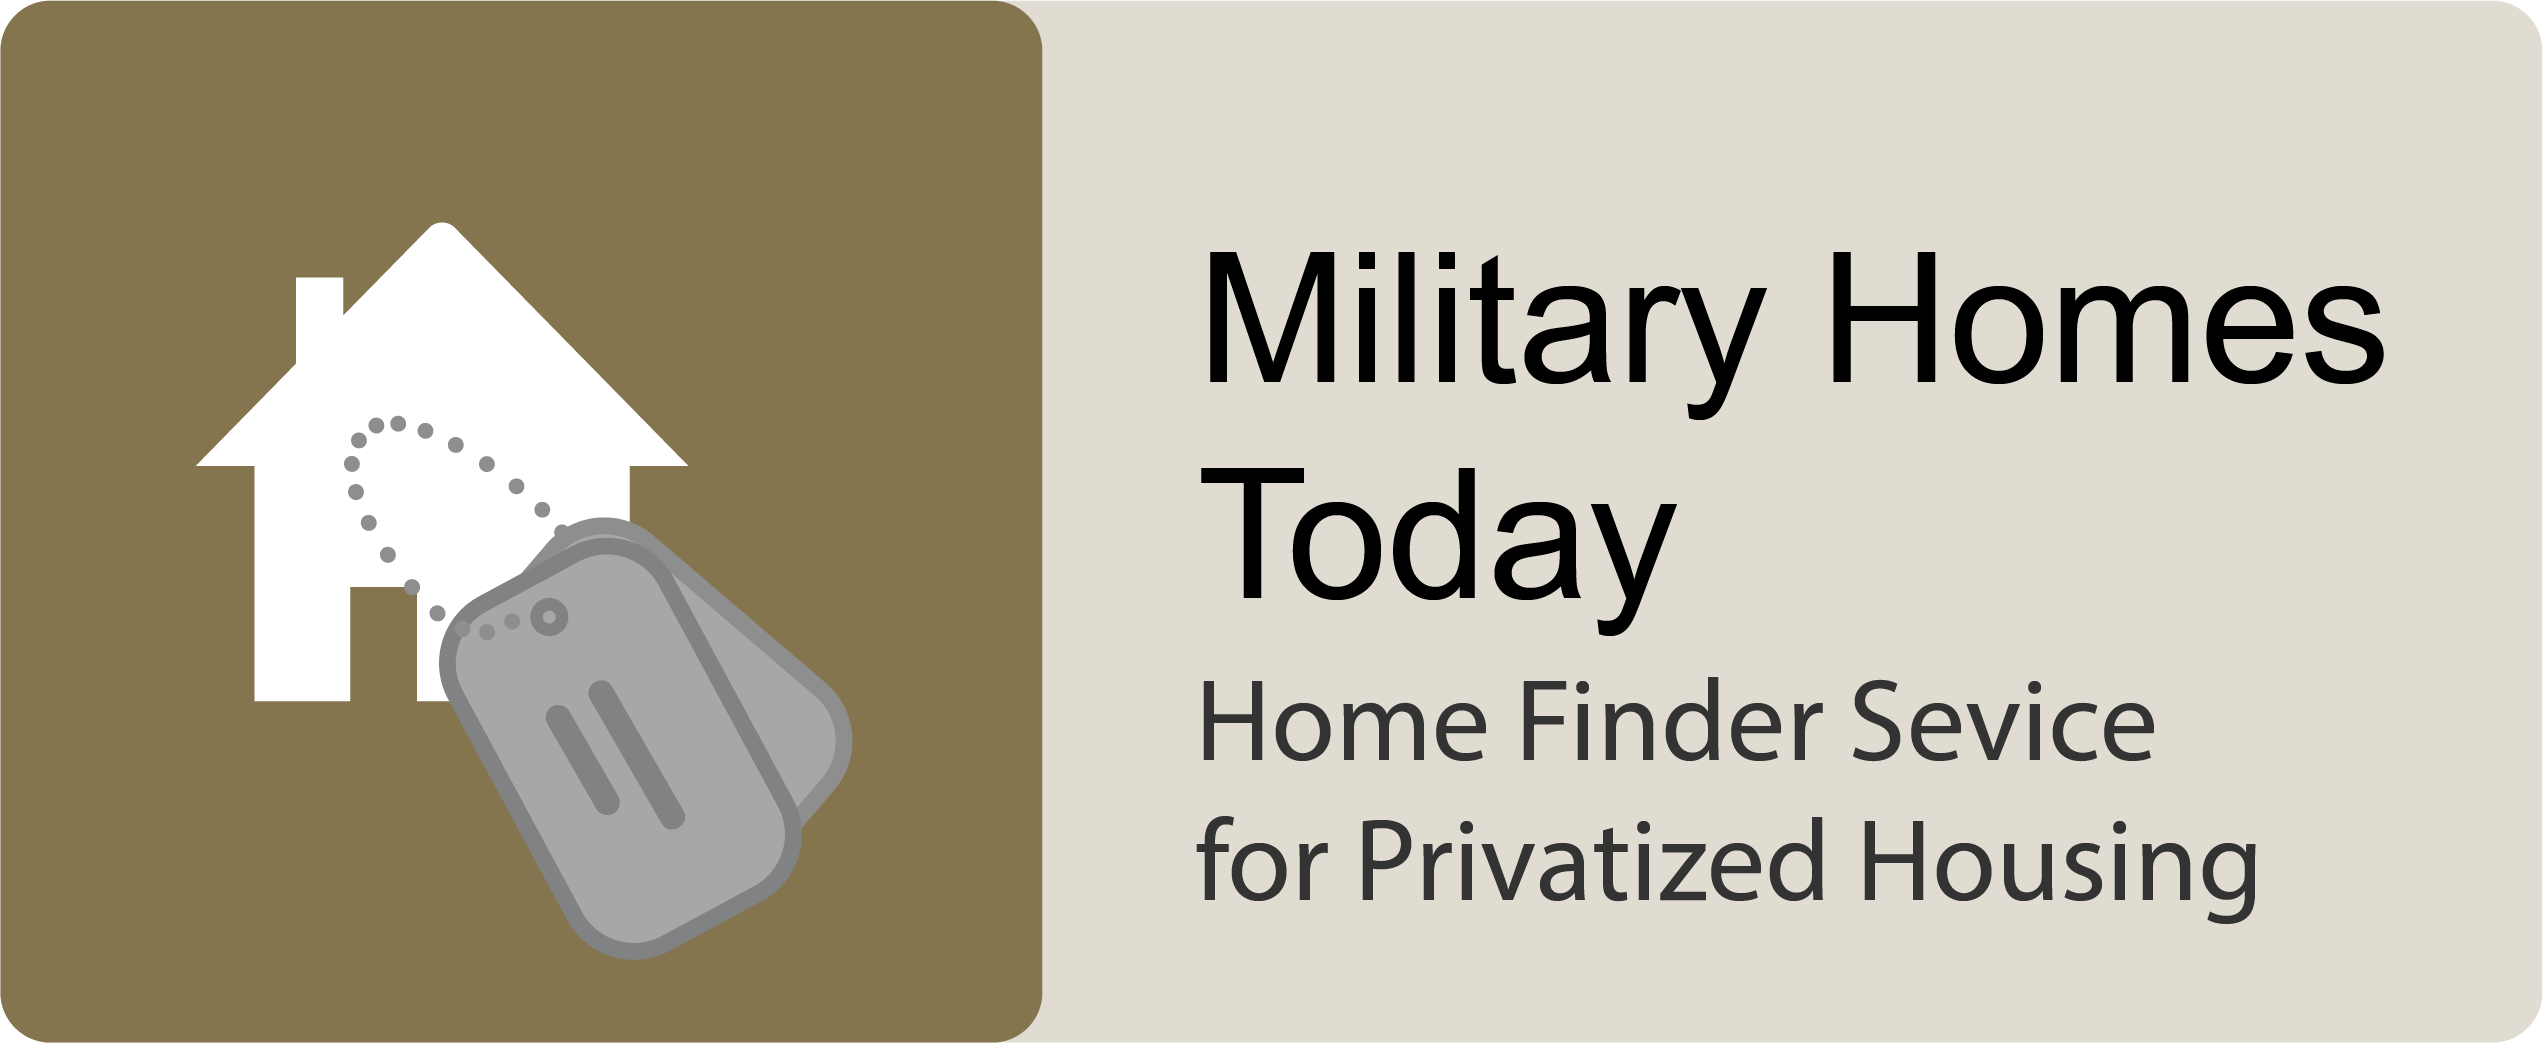 Military Homes Today